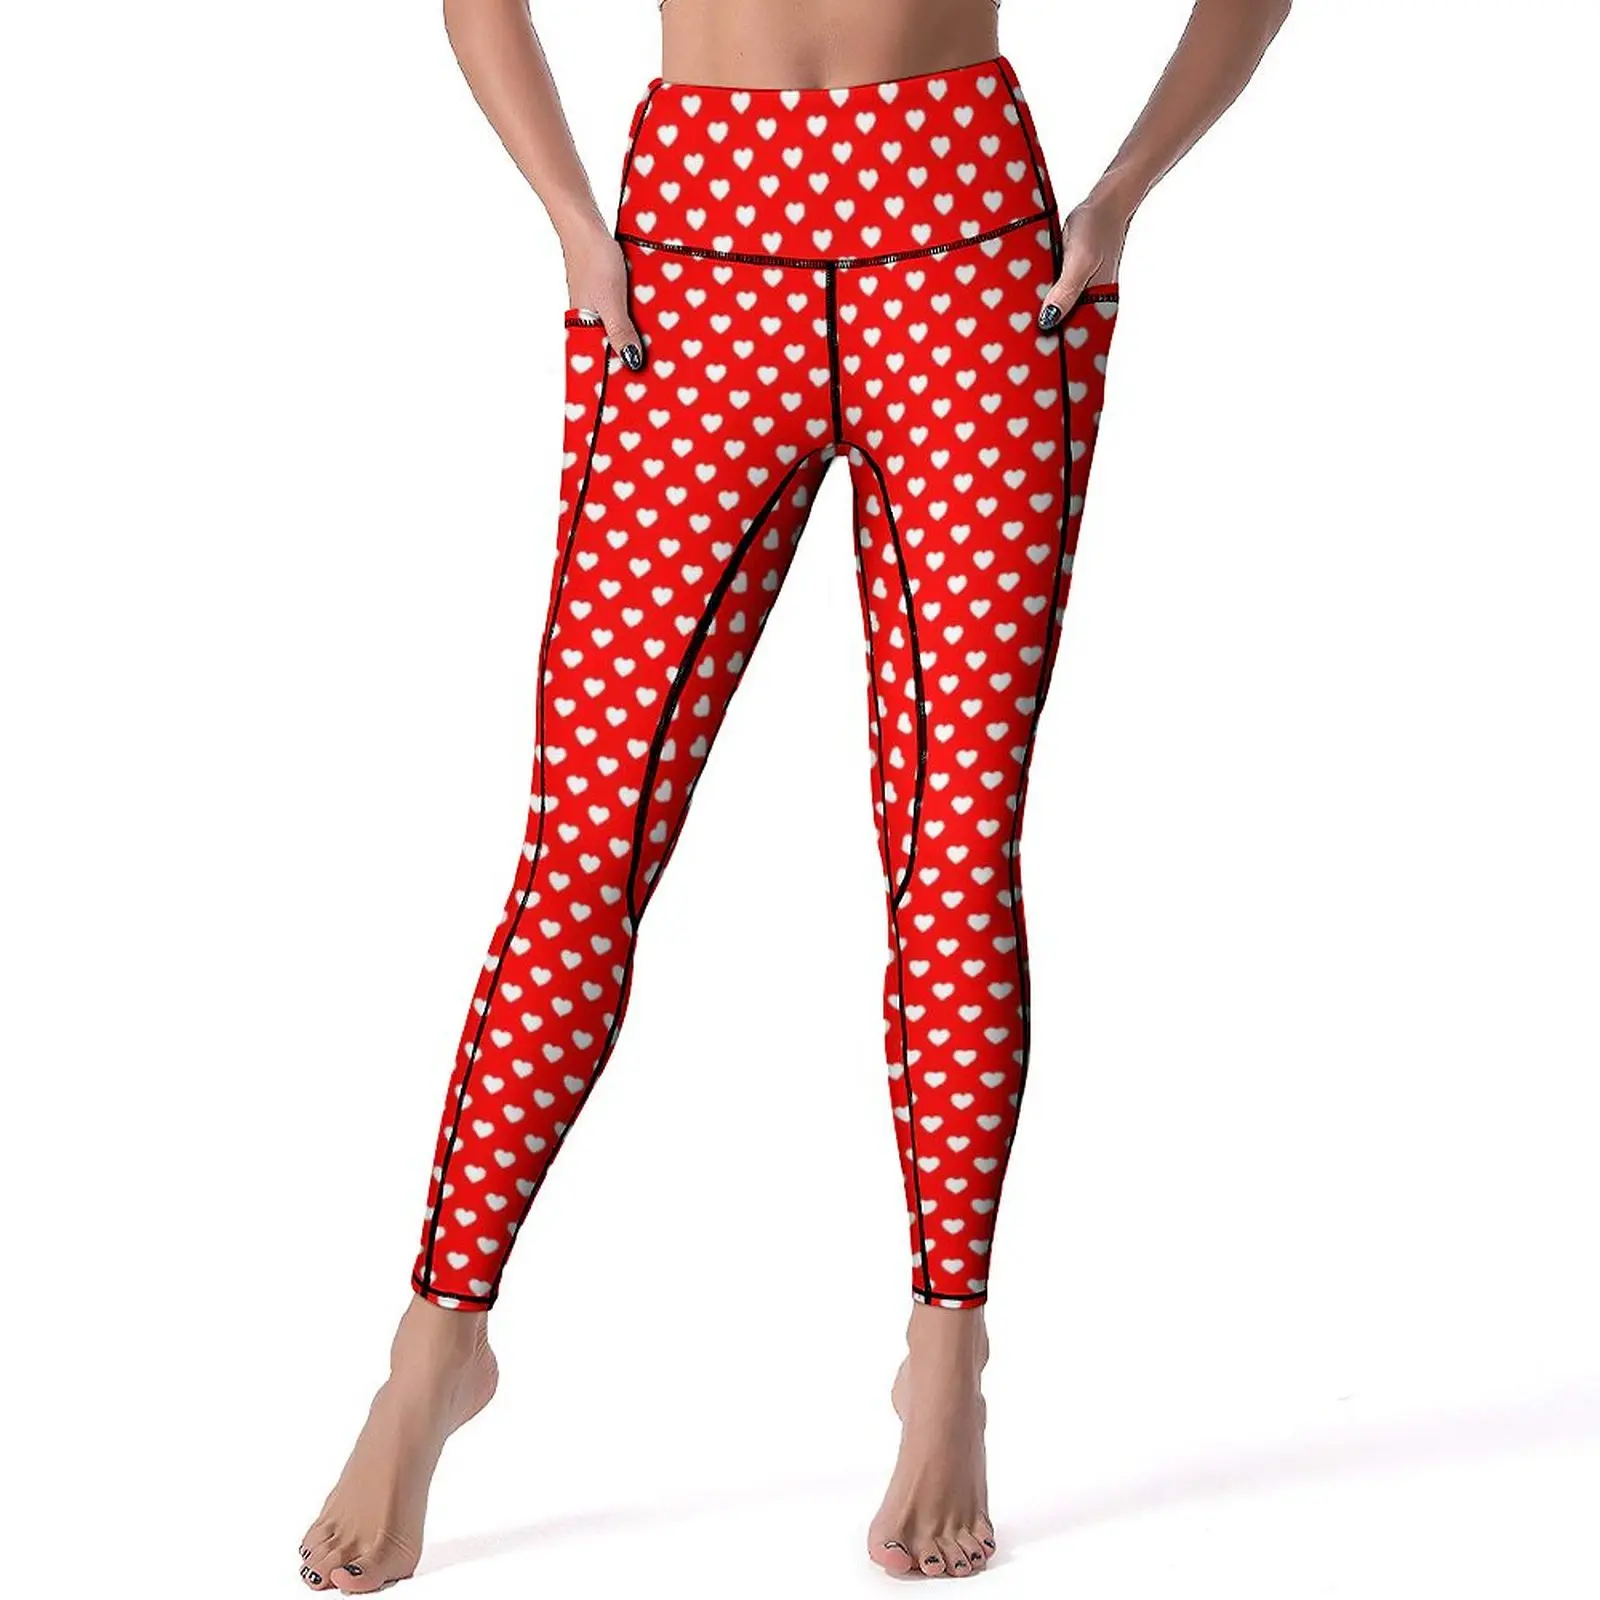 

Red And White Hearts Leggings Sexy Polka Dot Fitness Yoga Pants Push Up Elastic Sport Legging With Pockets Funny Graphic Leggins